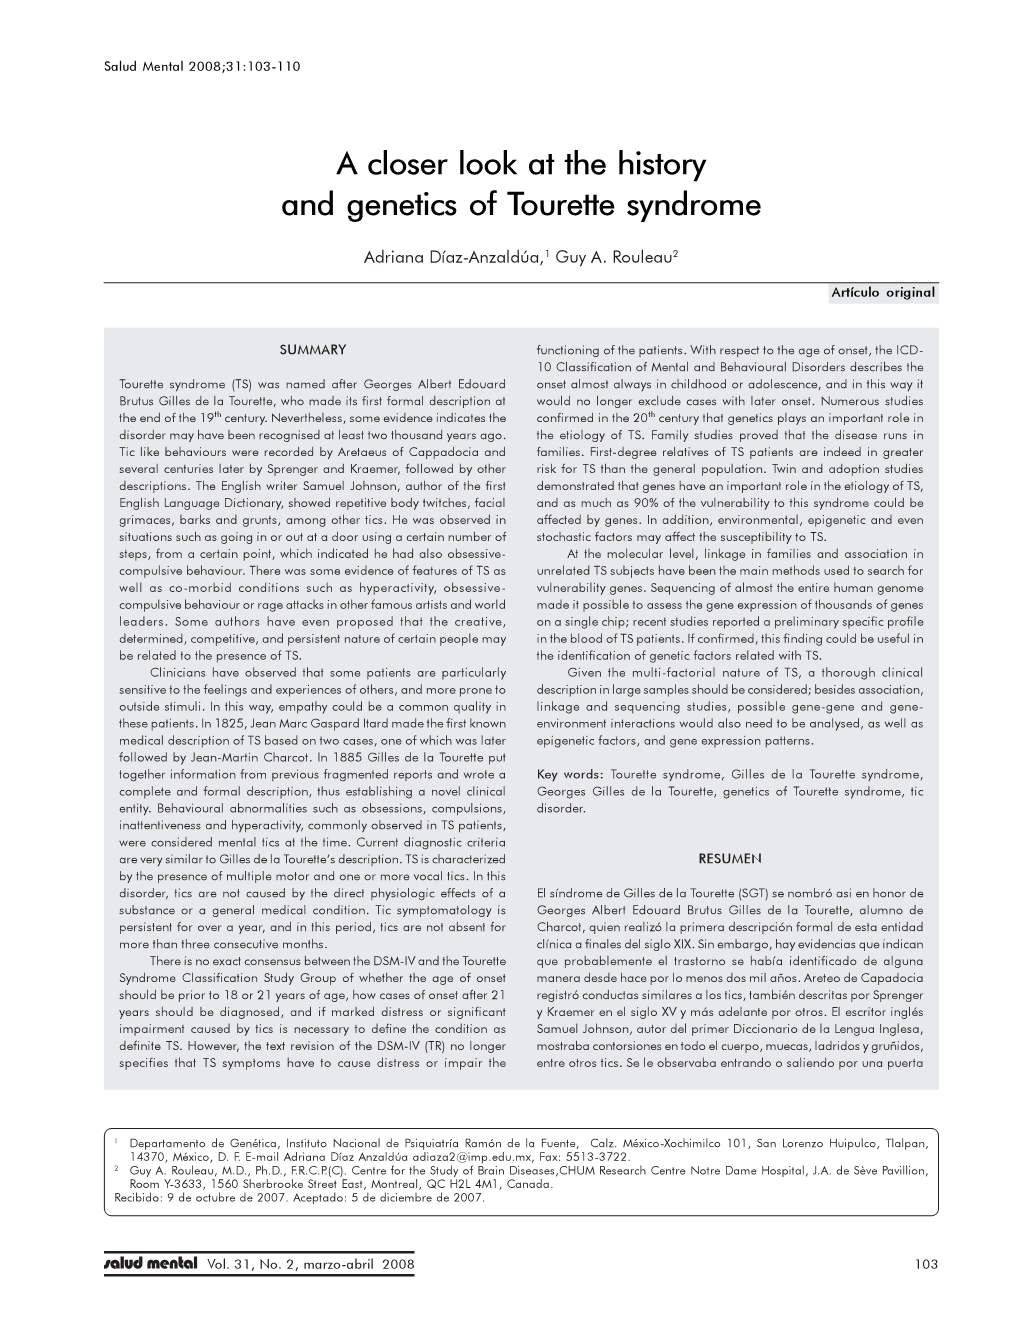 08-02-04 a Closer Look at the History and Genetics of Tourette Syndrome